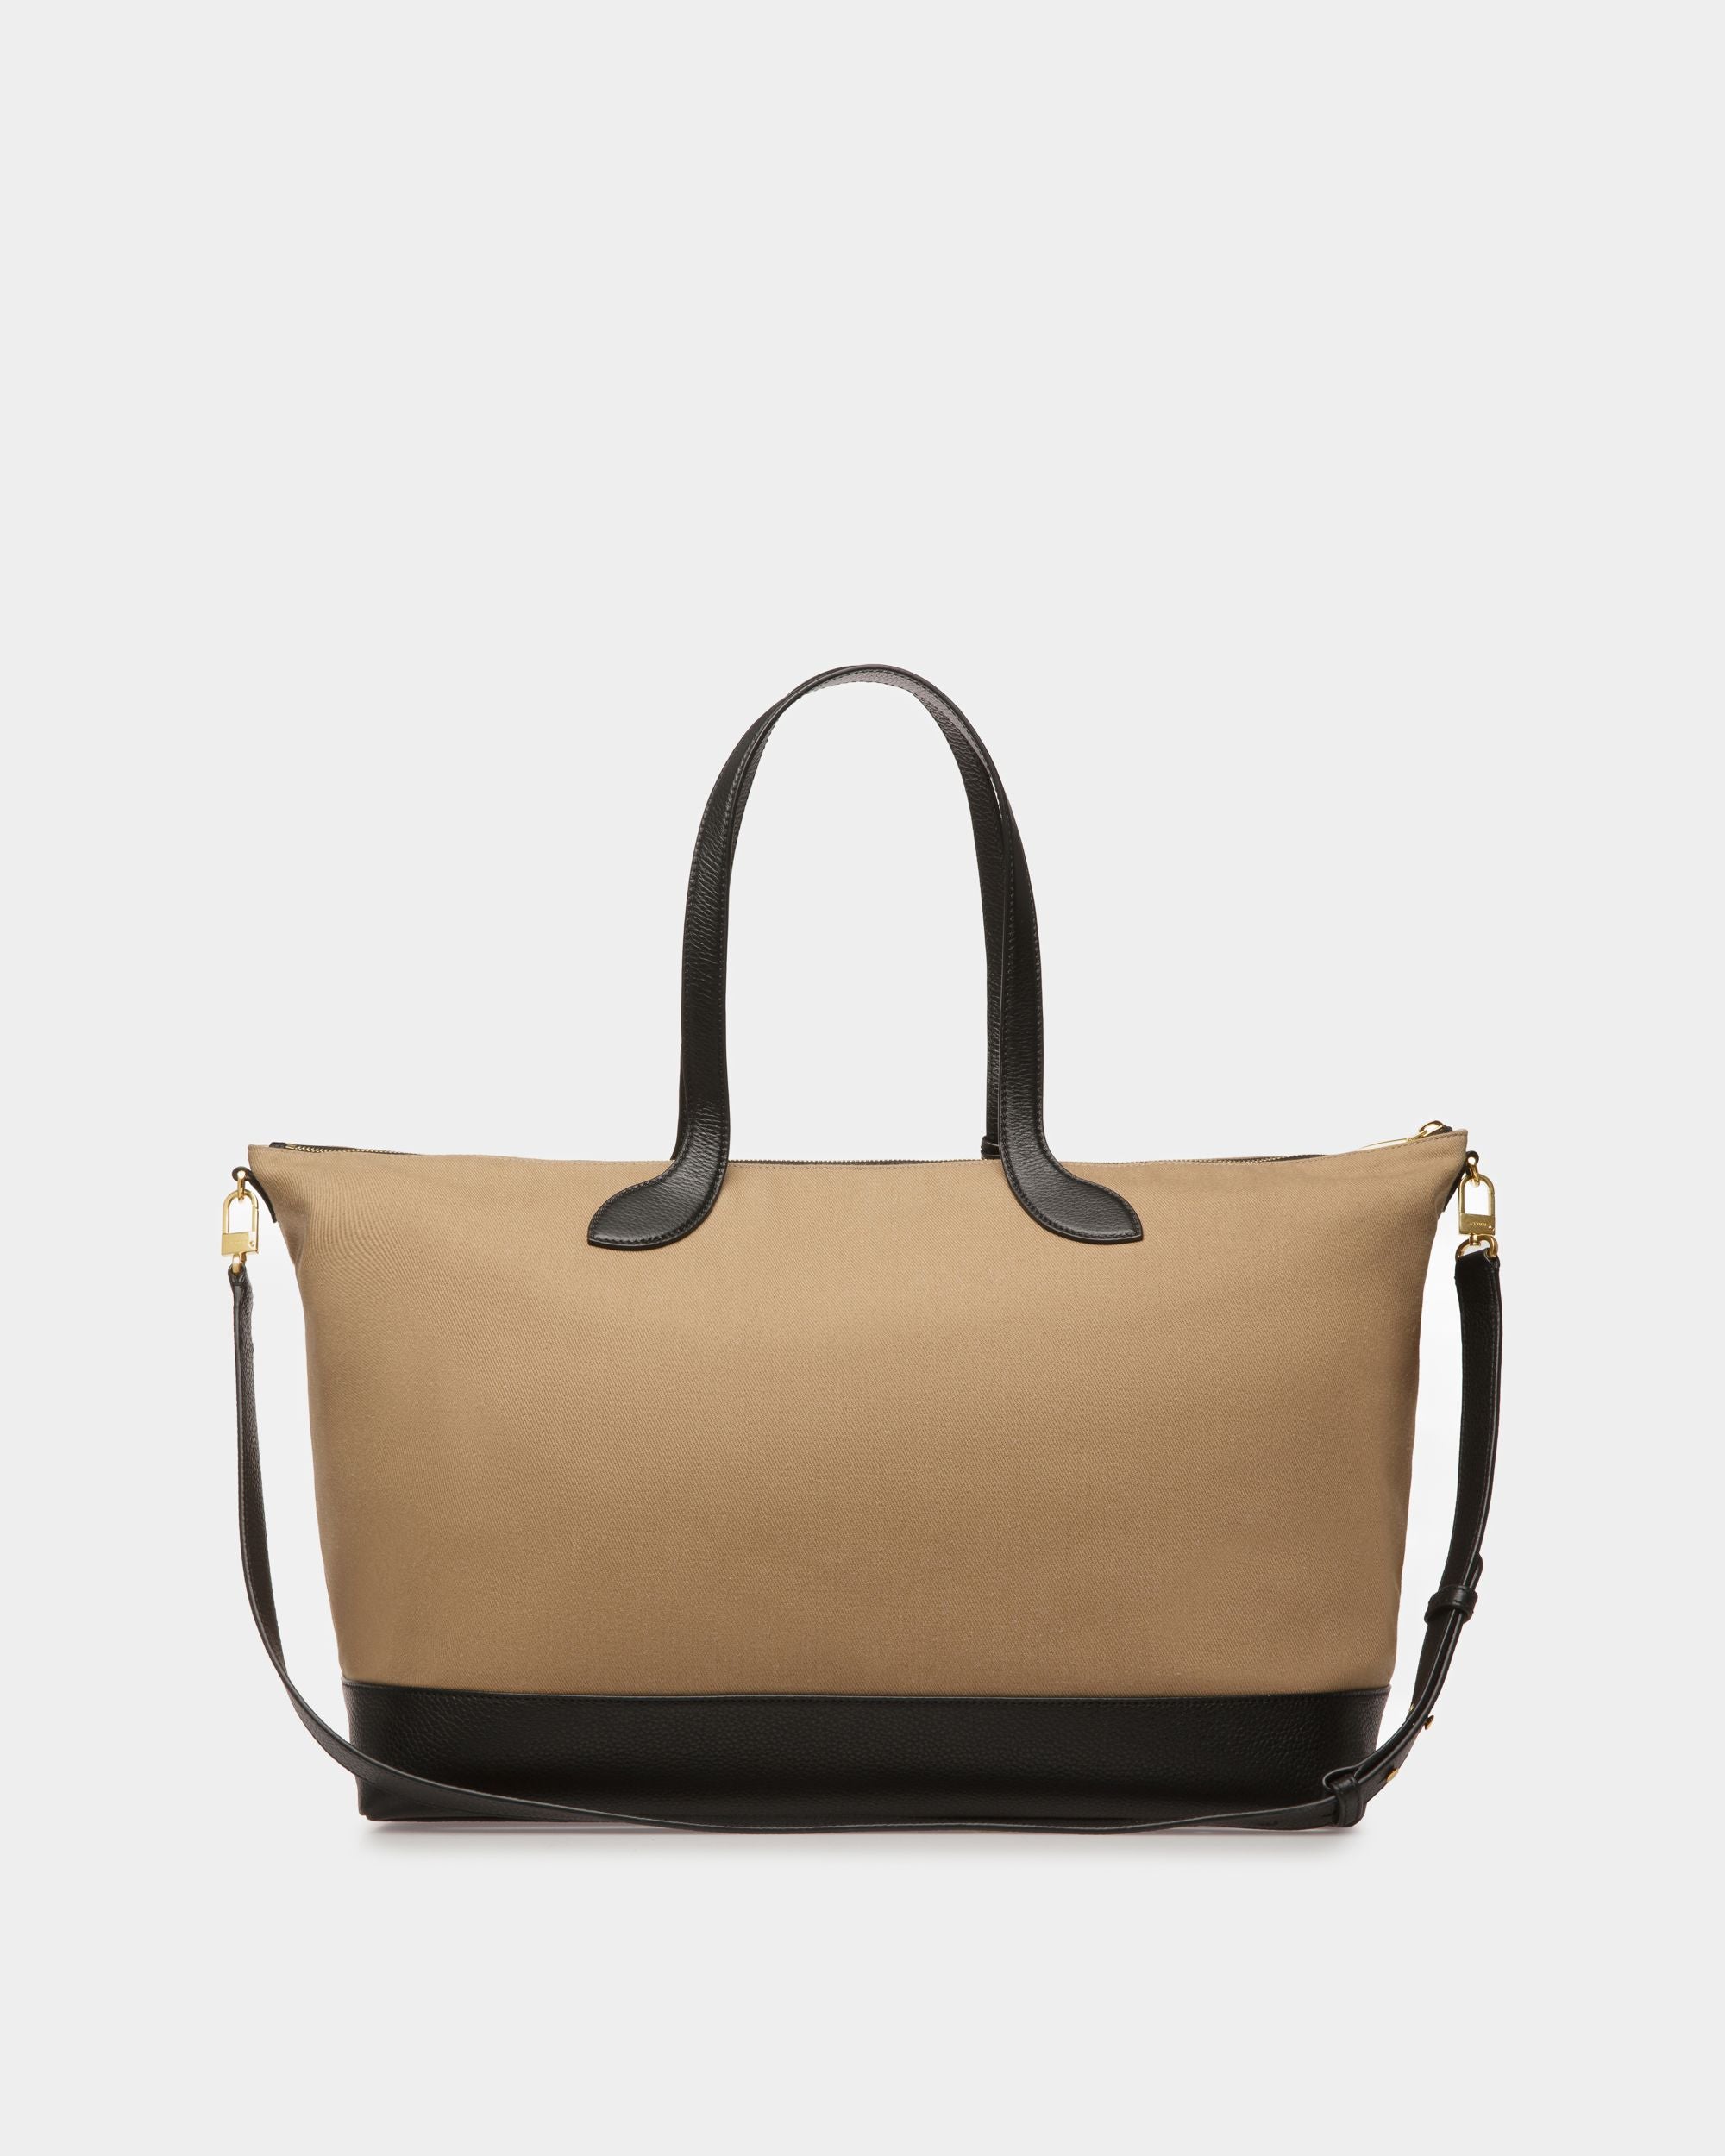 24 Hours | Women's Tote Bag | Sand And Black Fabric | Bally | Still Life Back